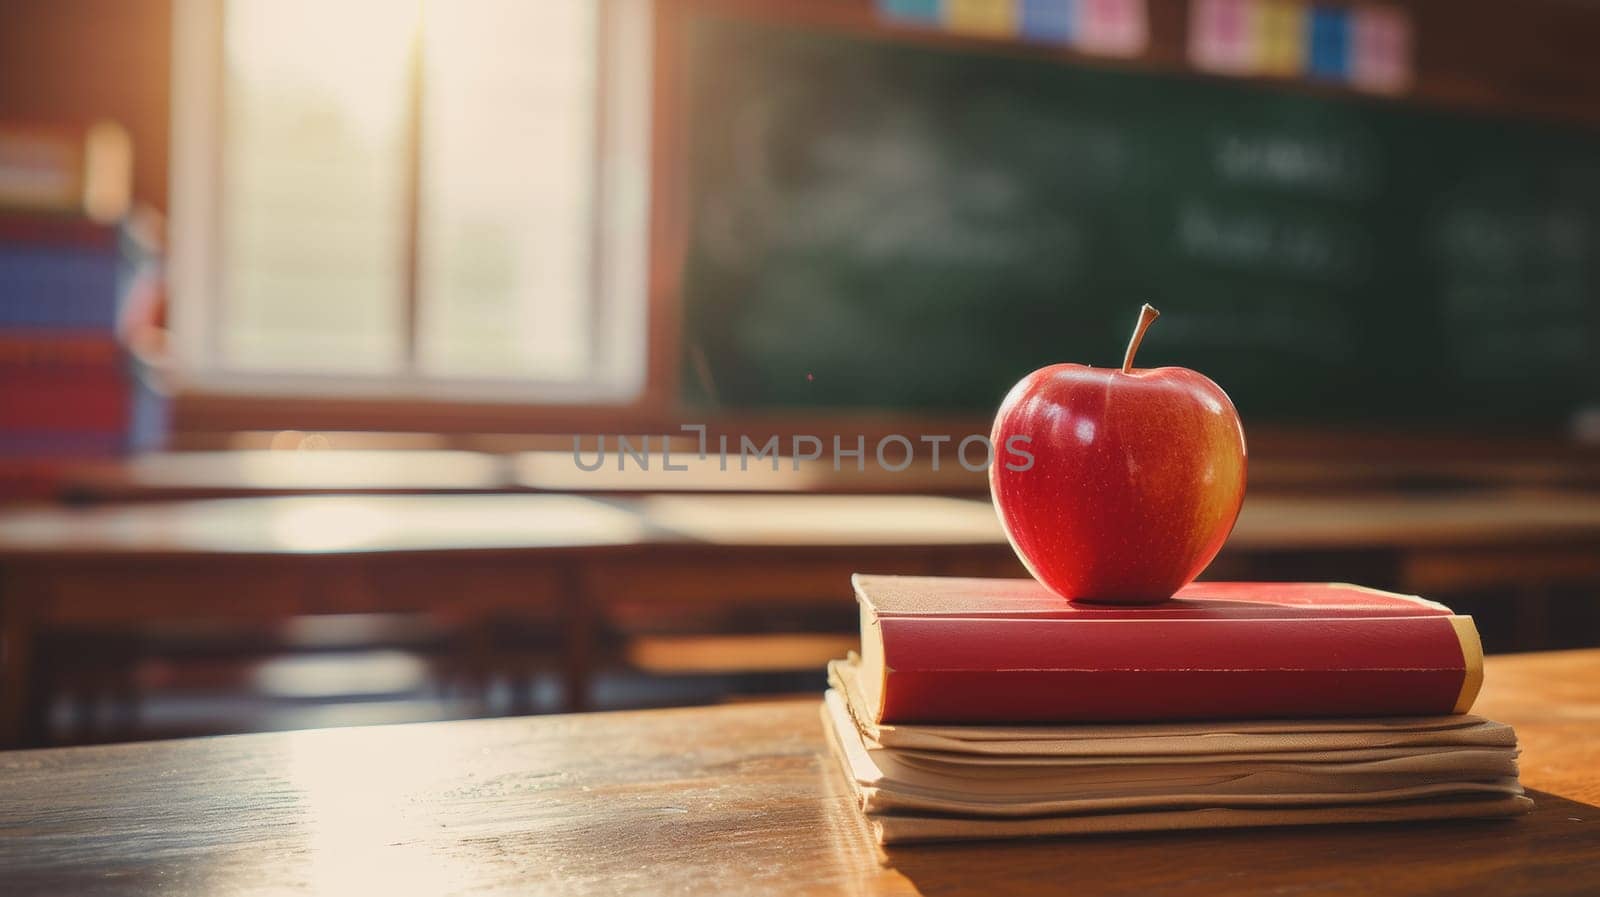 An apple sitting on top of books in a classroom